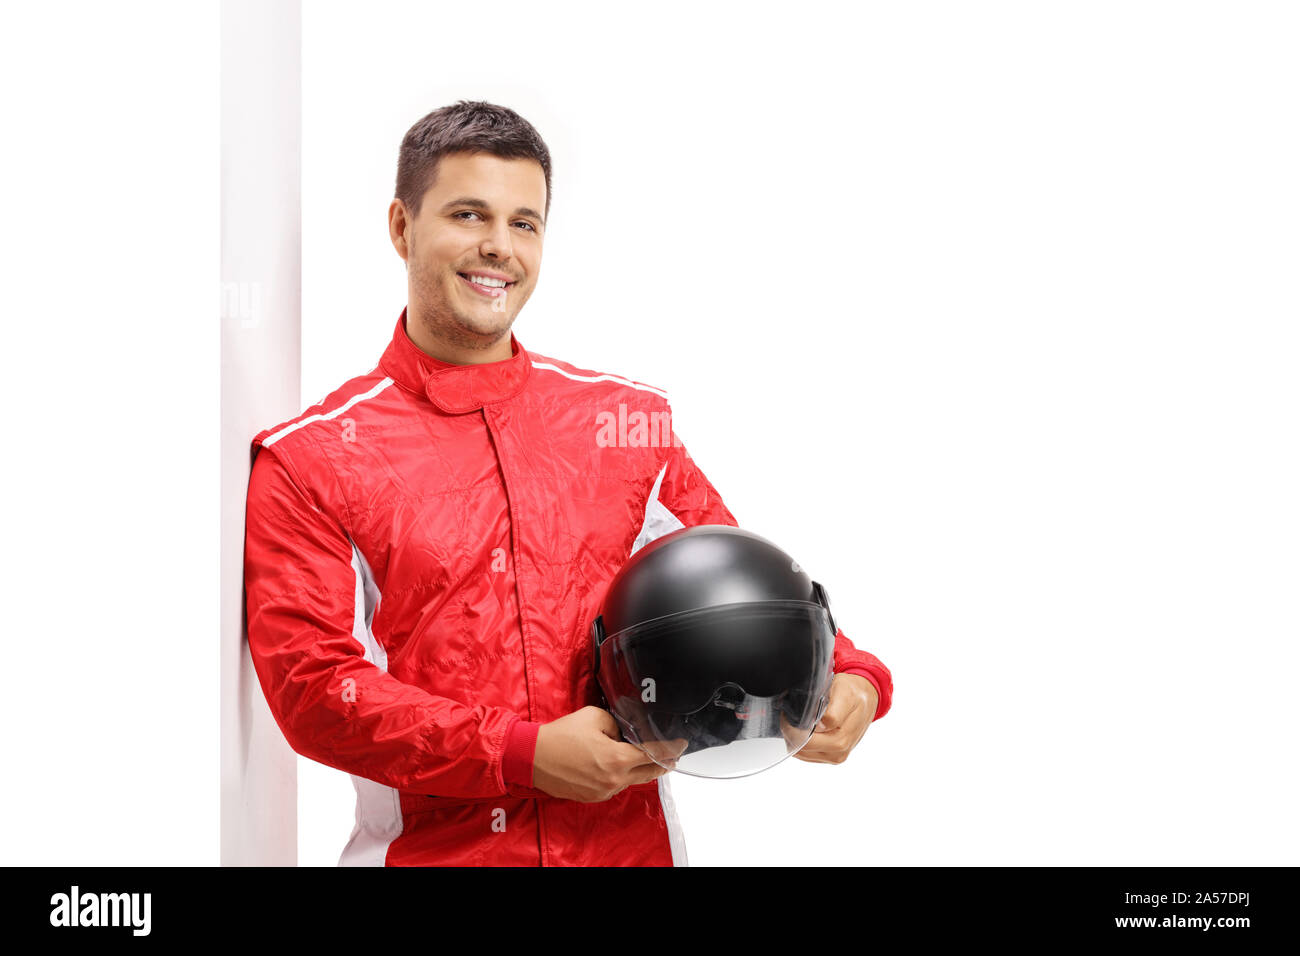 Car racer holding a helmet and leaning against a wall isolated on white background Stock Photo